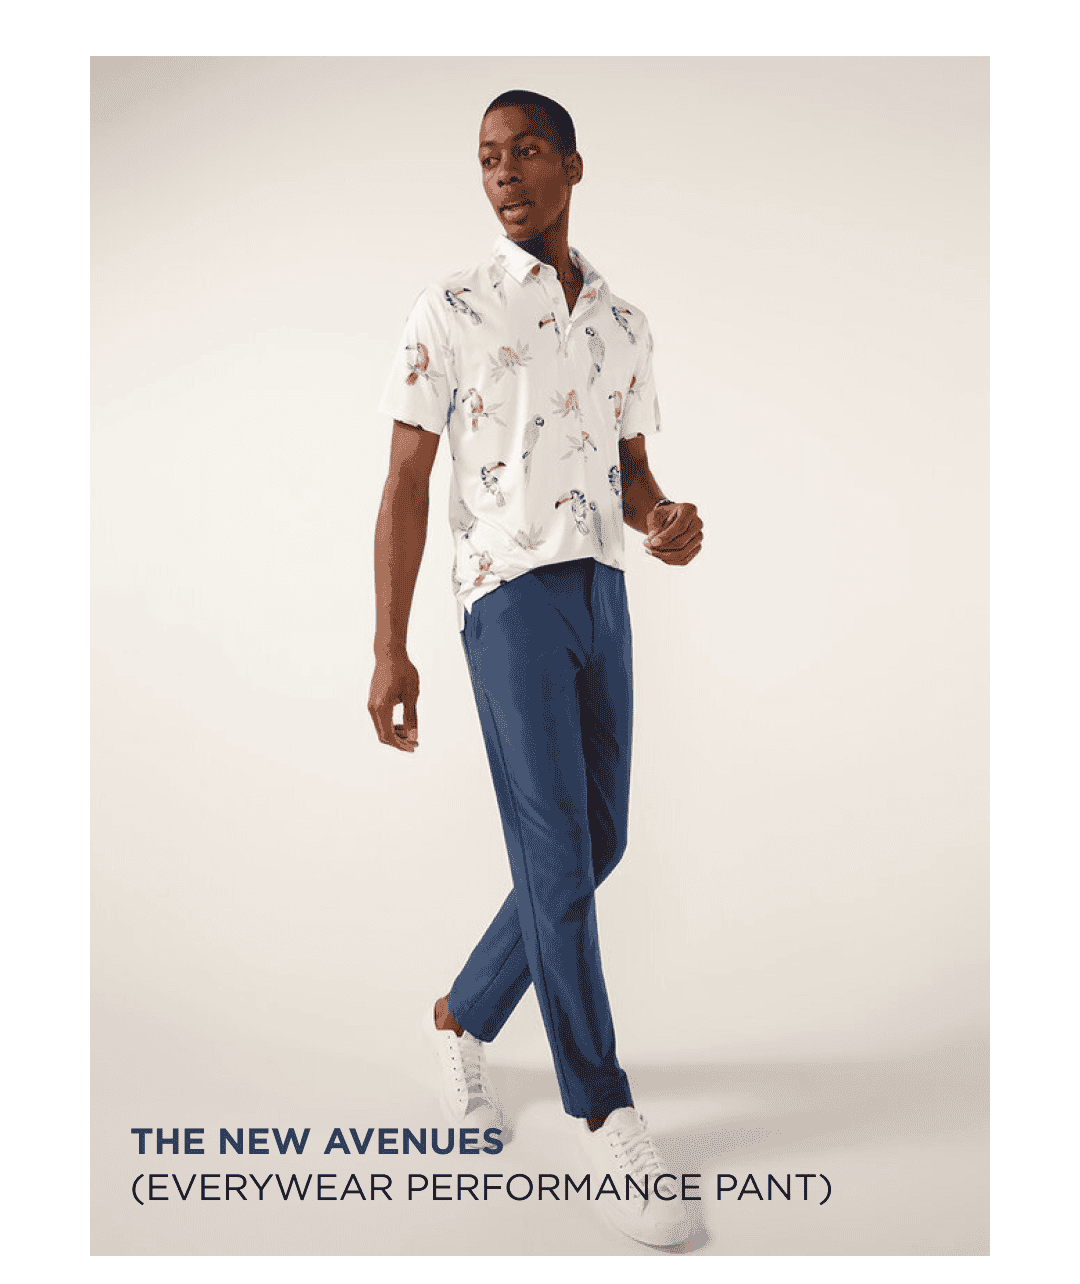 Everywear Performance Pant: The New Avenues